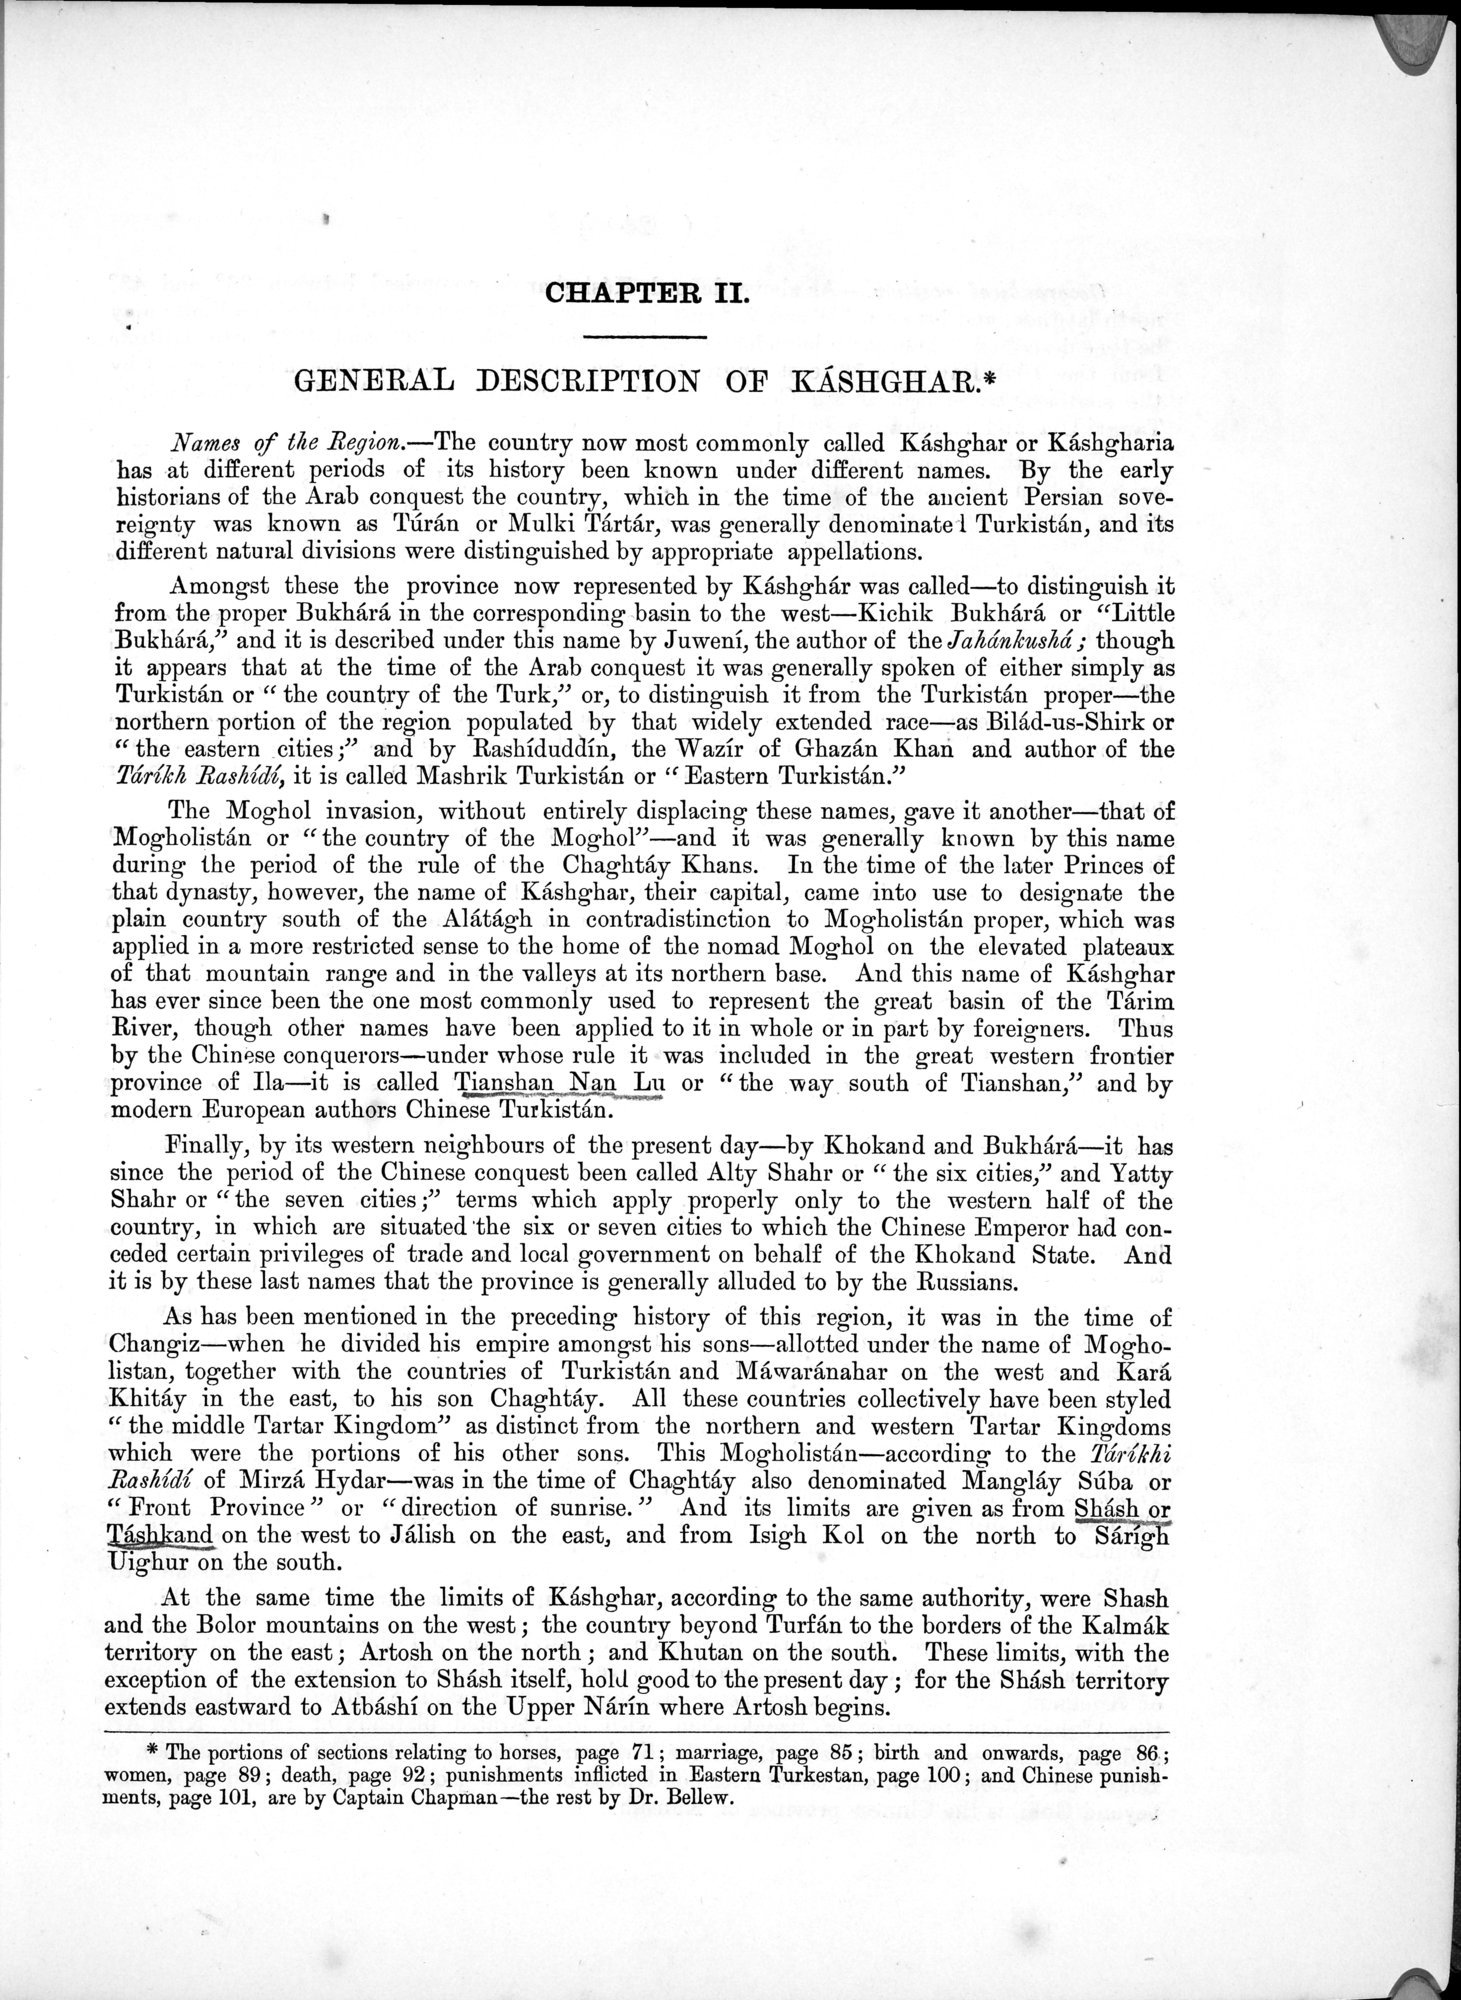 Report of a Mission to Yarkund in 1873 : vol.1 / Page 51 (Grayscale High Resolution Image)